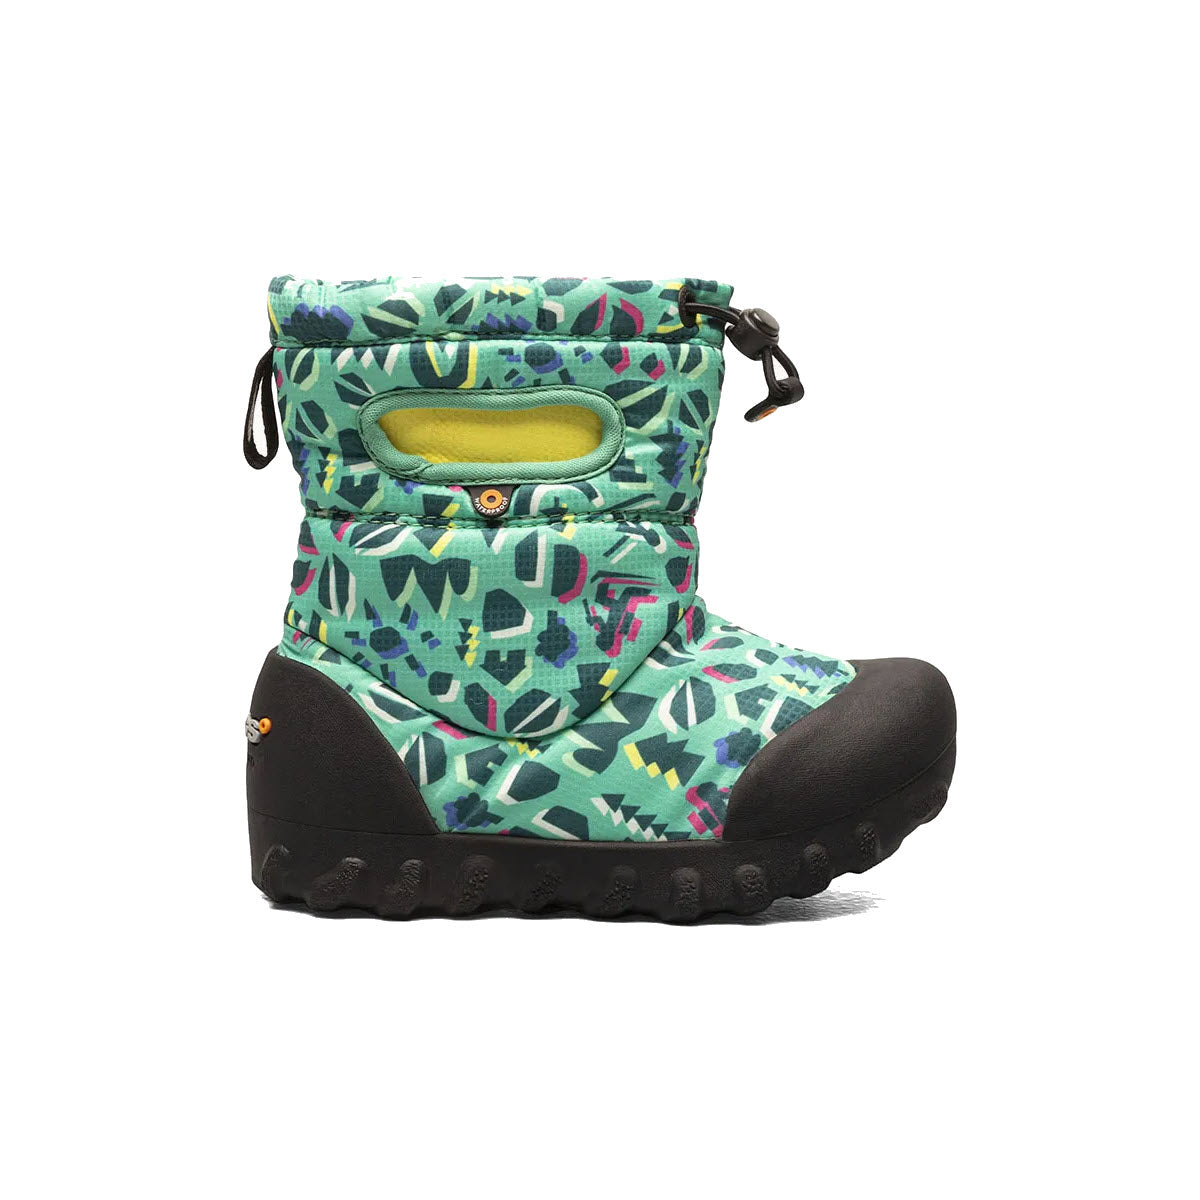 A colorful patterned Bogs B-MOC Snow boot with a thick black sole and yellow loop on the back, isolated on a white background.